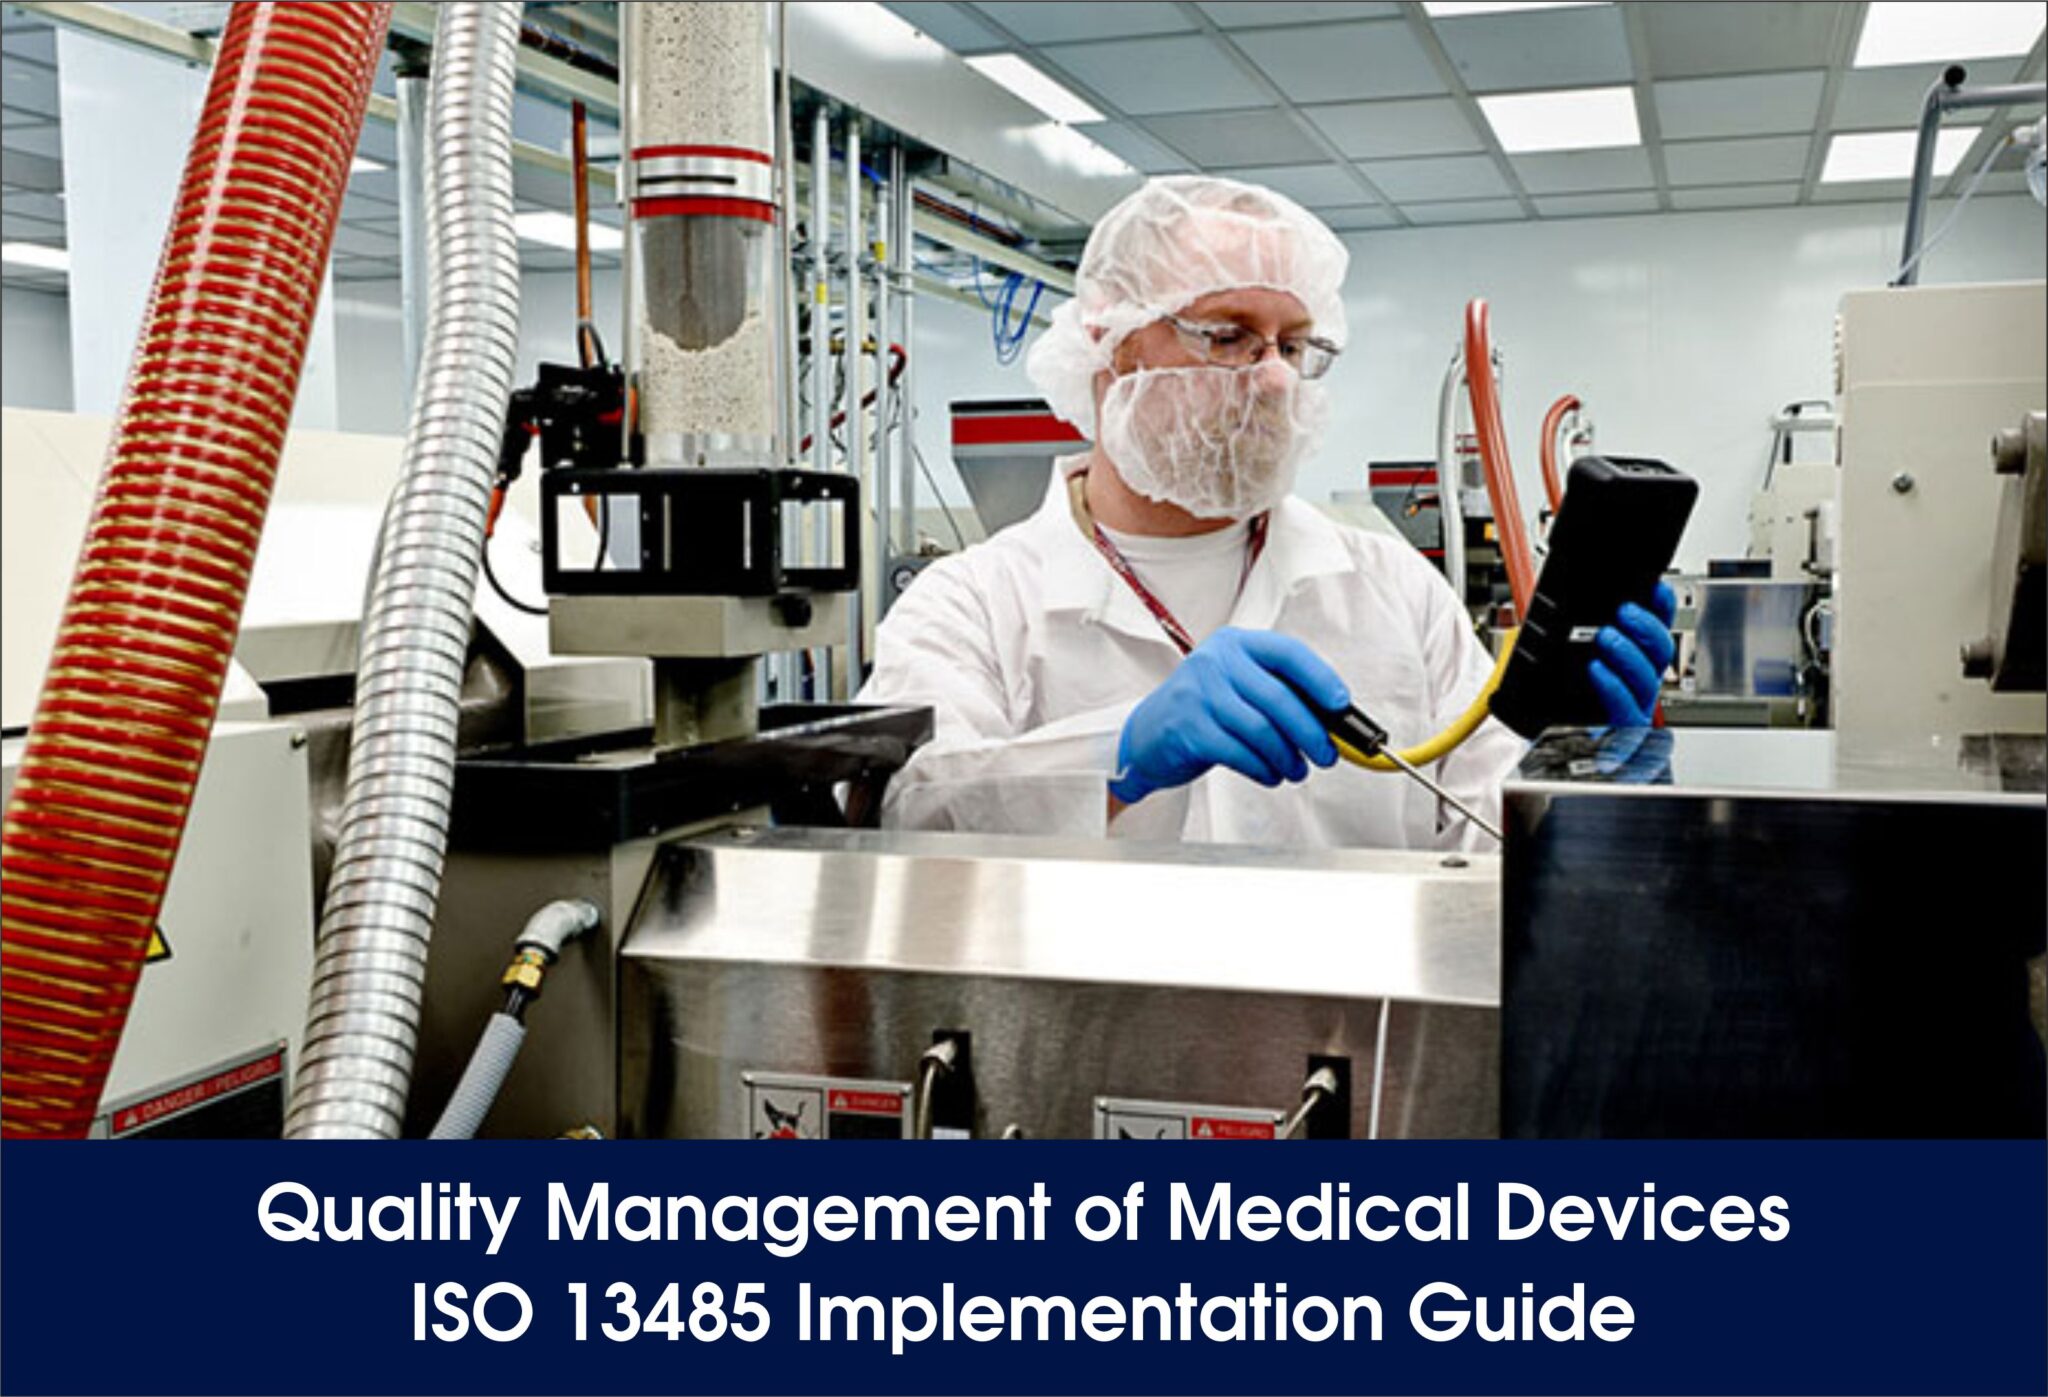 Quality Management of Medical Devices - ISO 13485 Implementation Guide